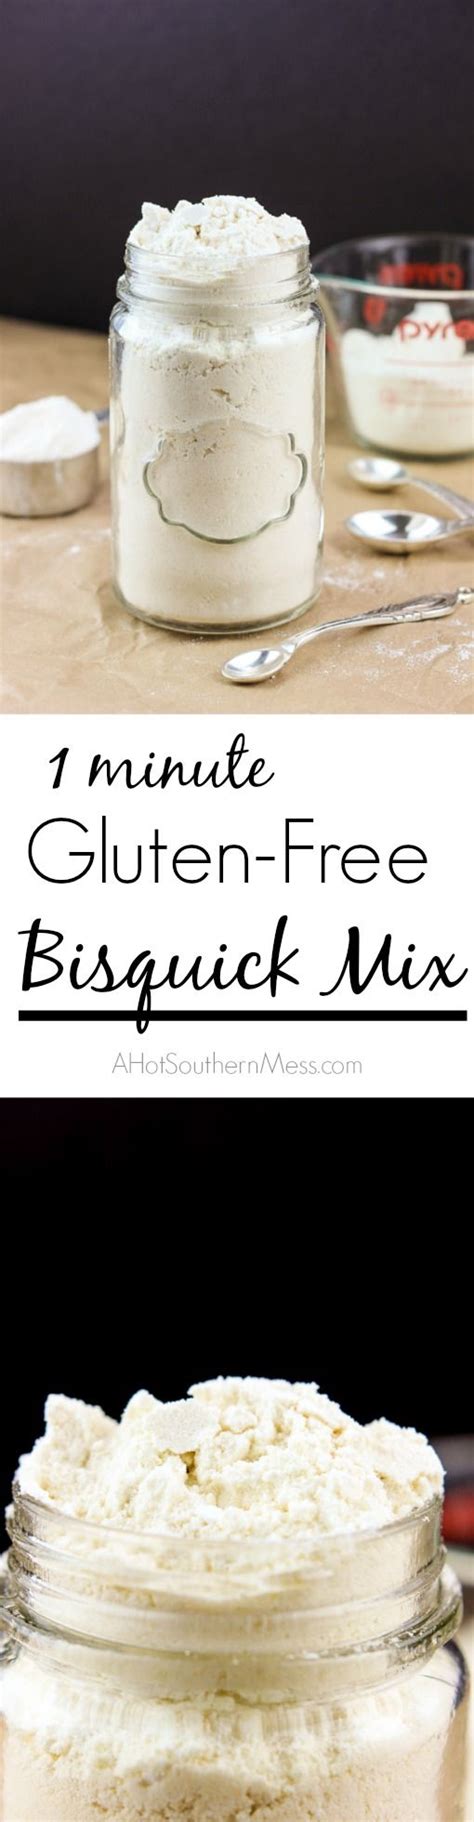 Better bisquick dumplings recipe step 3 photo let them sit there about 10 minutes then flip them over and kill the heat. Gluten-Free Bisquick Mix | Recipe | Gluten, Gluten free, Foods with gluten